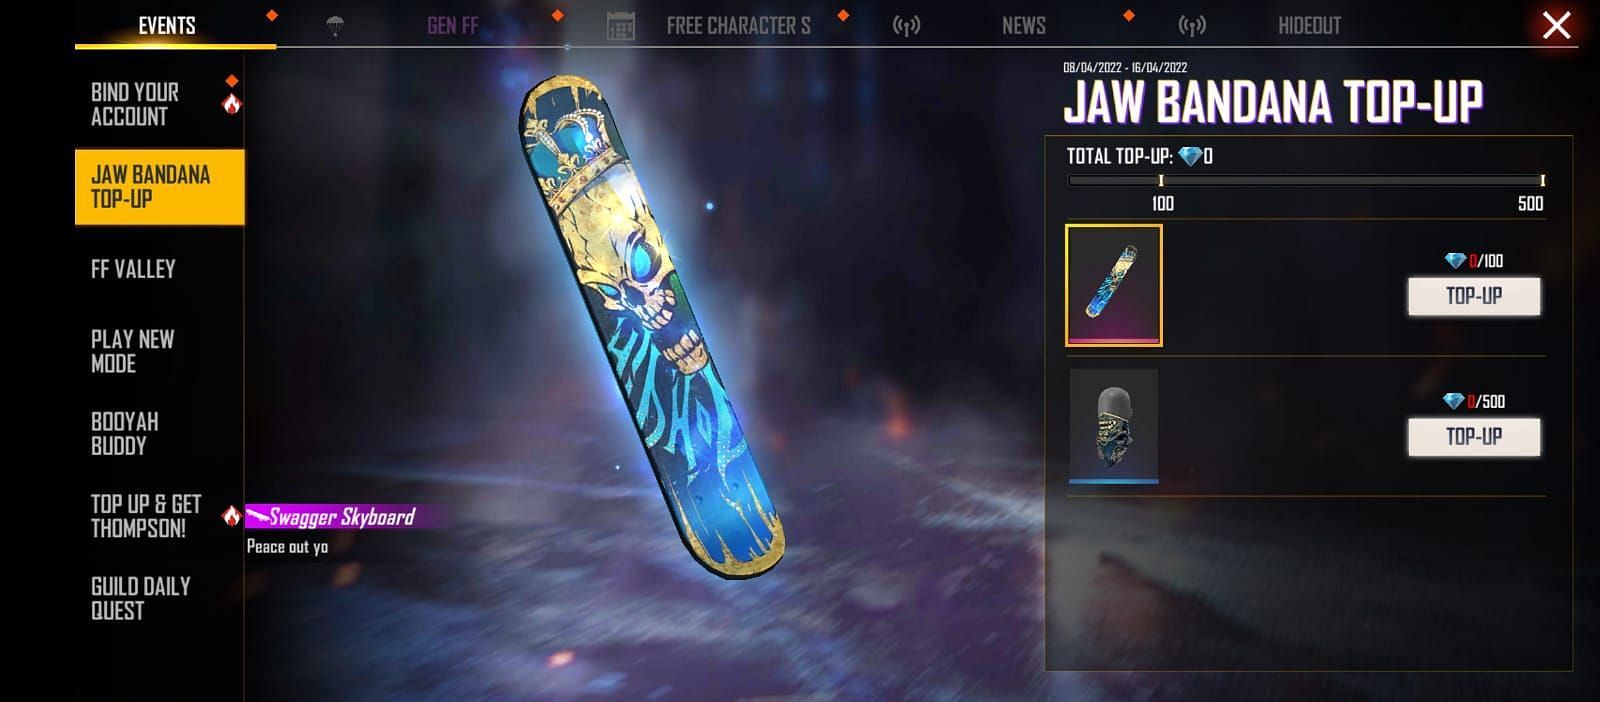 Sauce Swagger Skyboard can be claimed by topping up 100 diamonds (Image via Garena)